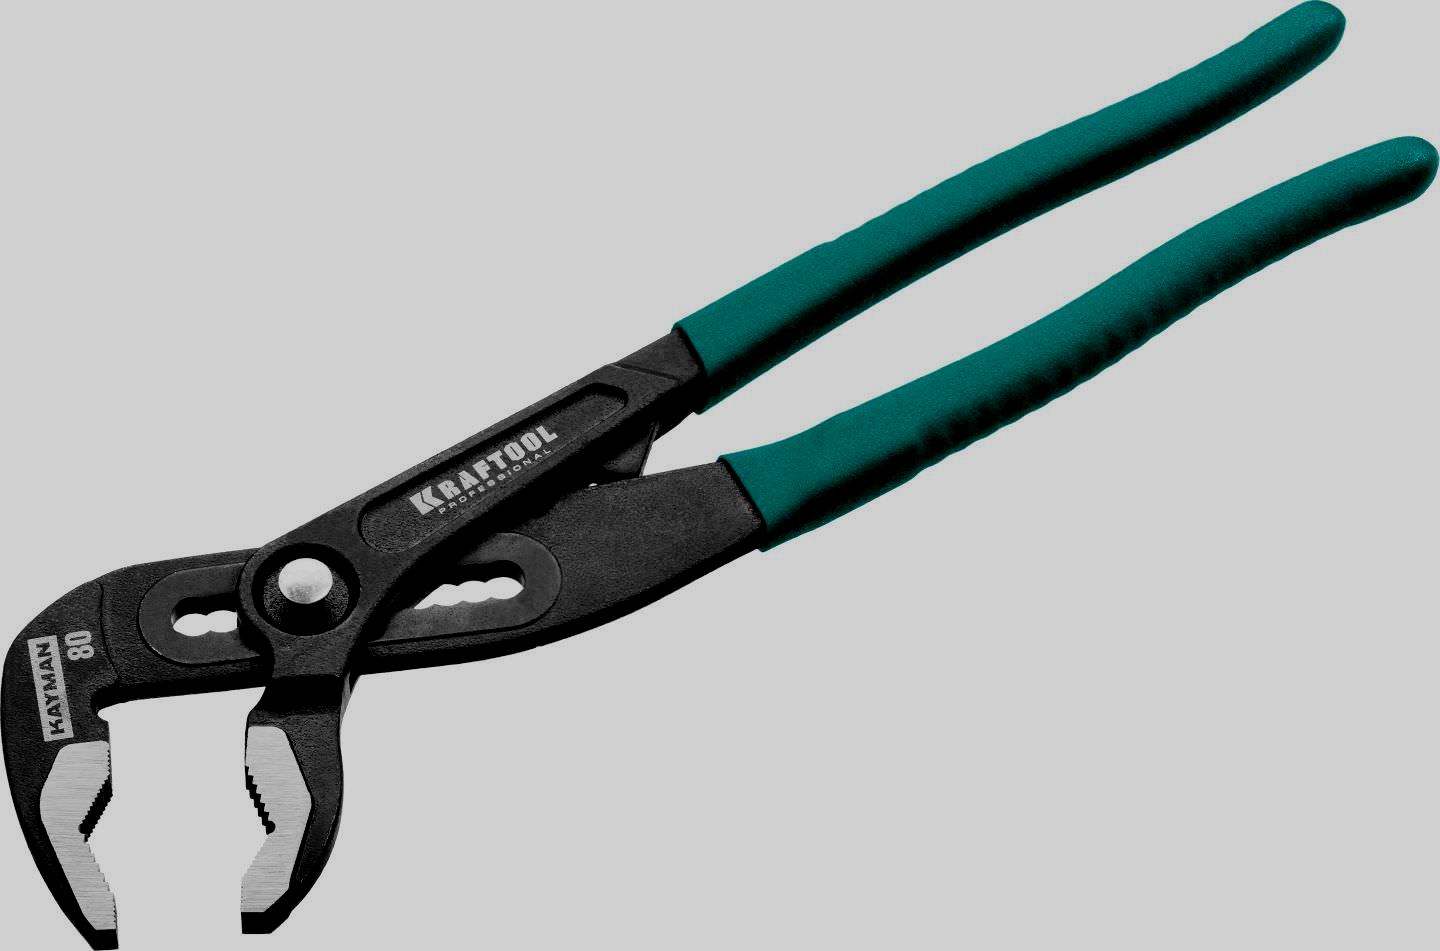 Rating of the best adjustable pliers for 2020